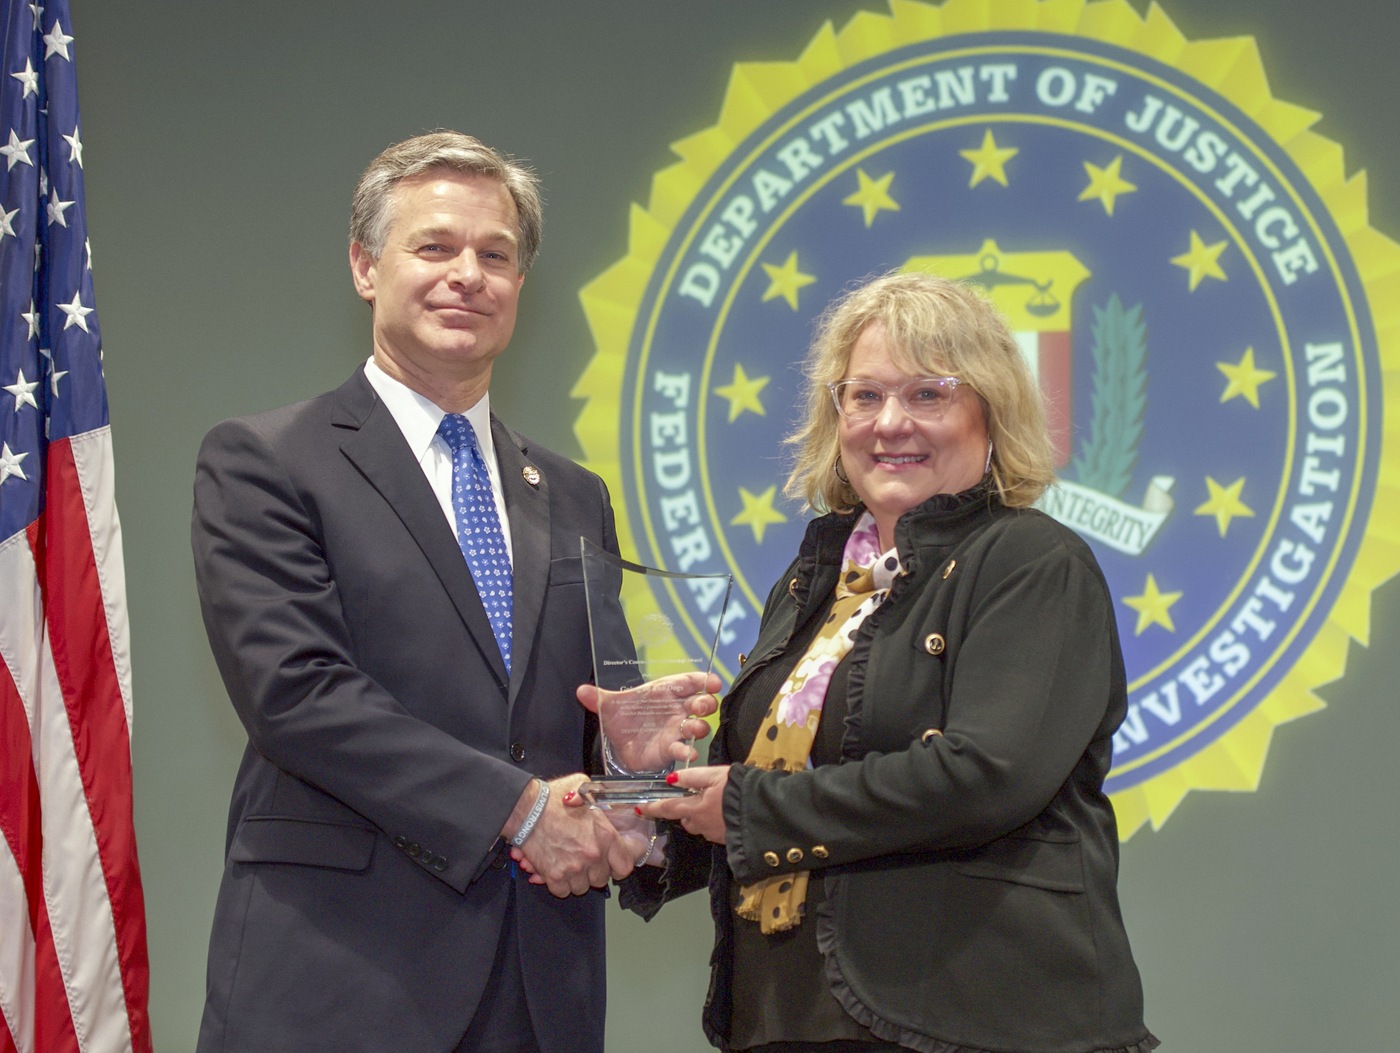 FBI Director Christopher Wray presents Kansas City Division recipient Going to the Dogs (represented by Donna Wilson) with the Director’s Community Leadership Award (DCLA) at a ceremony at FBI Headquarters on May 3, 2019.